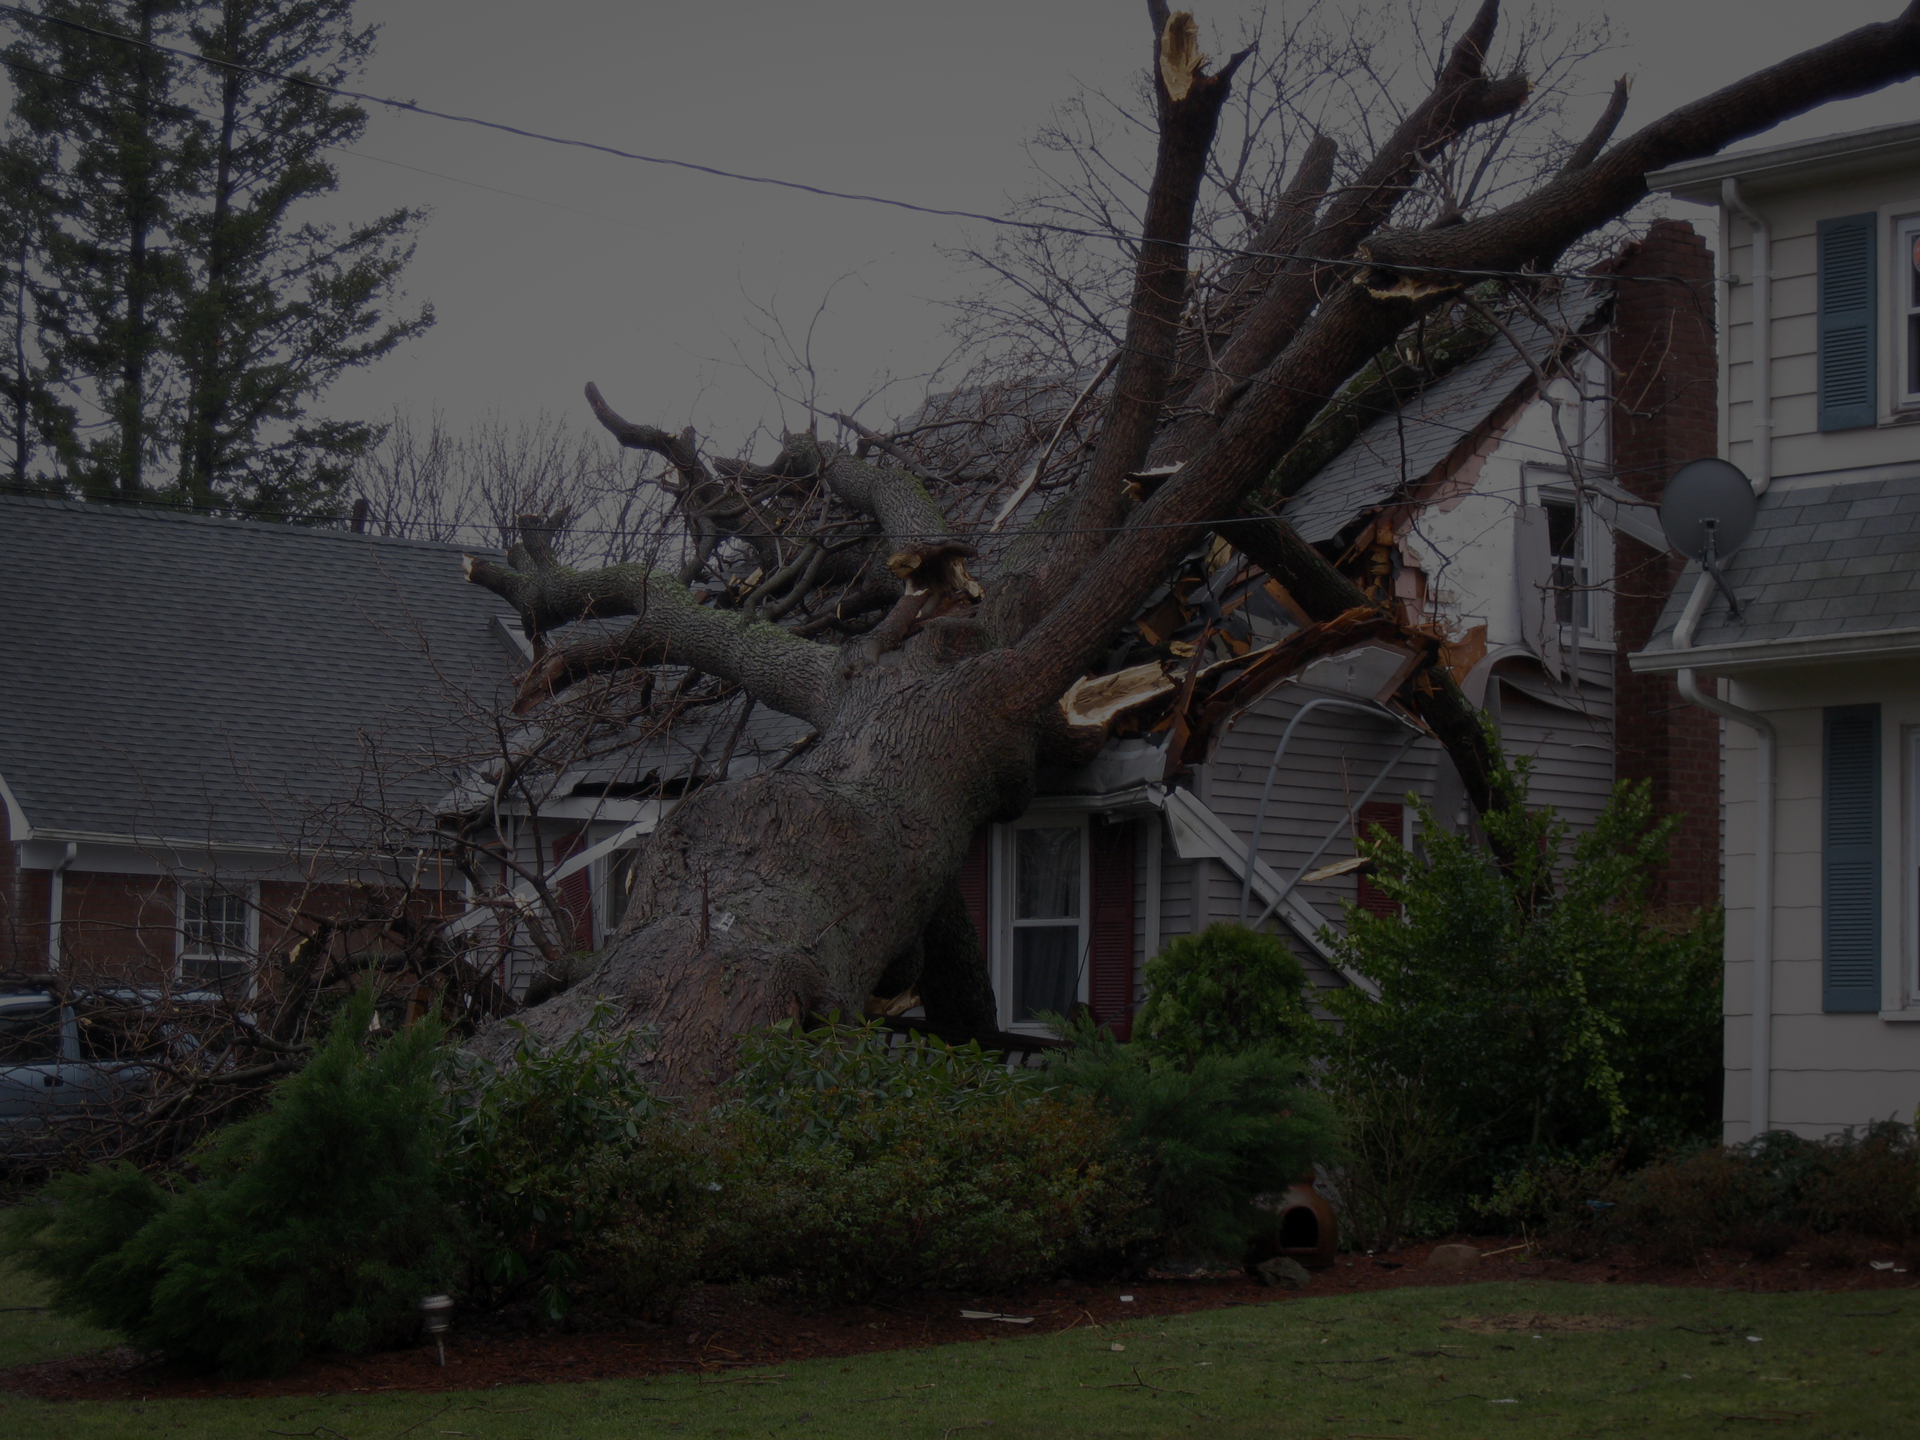 website design homepage image of a tree fallen over in a residential yard